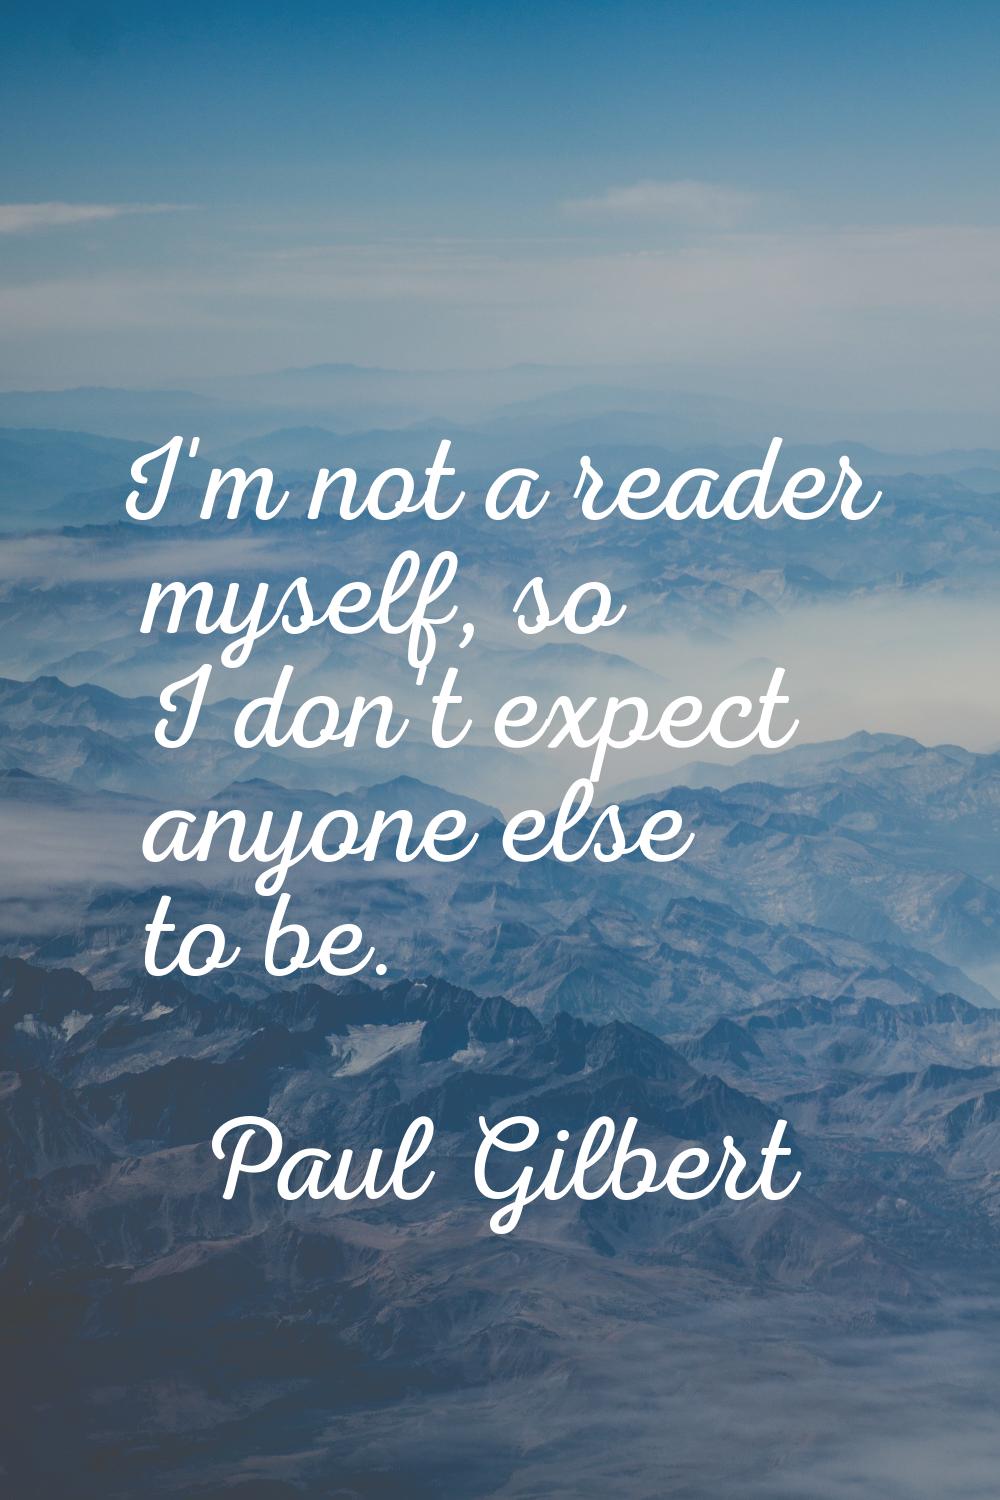 I'm not a reader myself, so I don't expect anyone else to be.